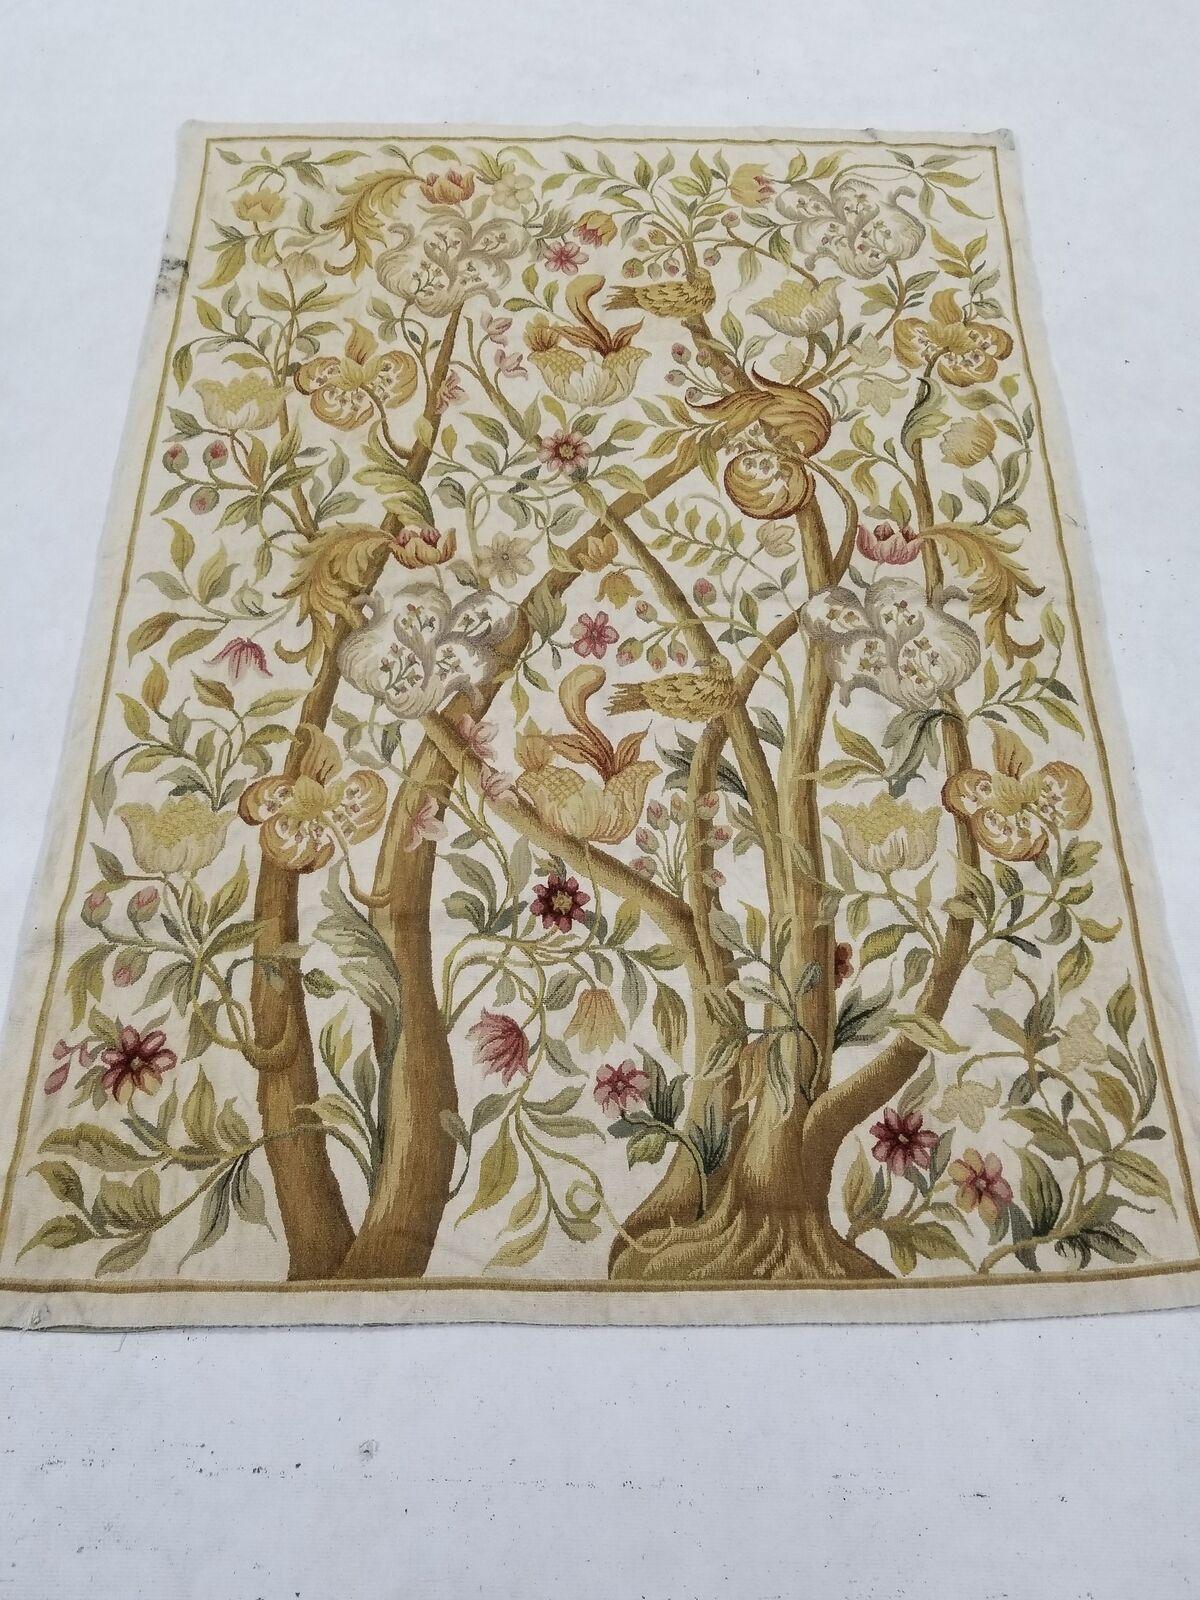 19thc French Antique Louis Rococo style Floral Aubusson Tapestry. I found this beauty in Nice France. There is a small stain on border top left. Not detracting at all. Birds, trees plants rococo element. Breathtaking Tapestry.